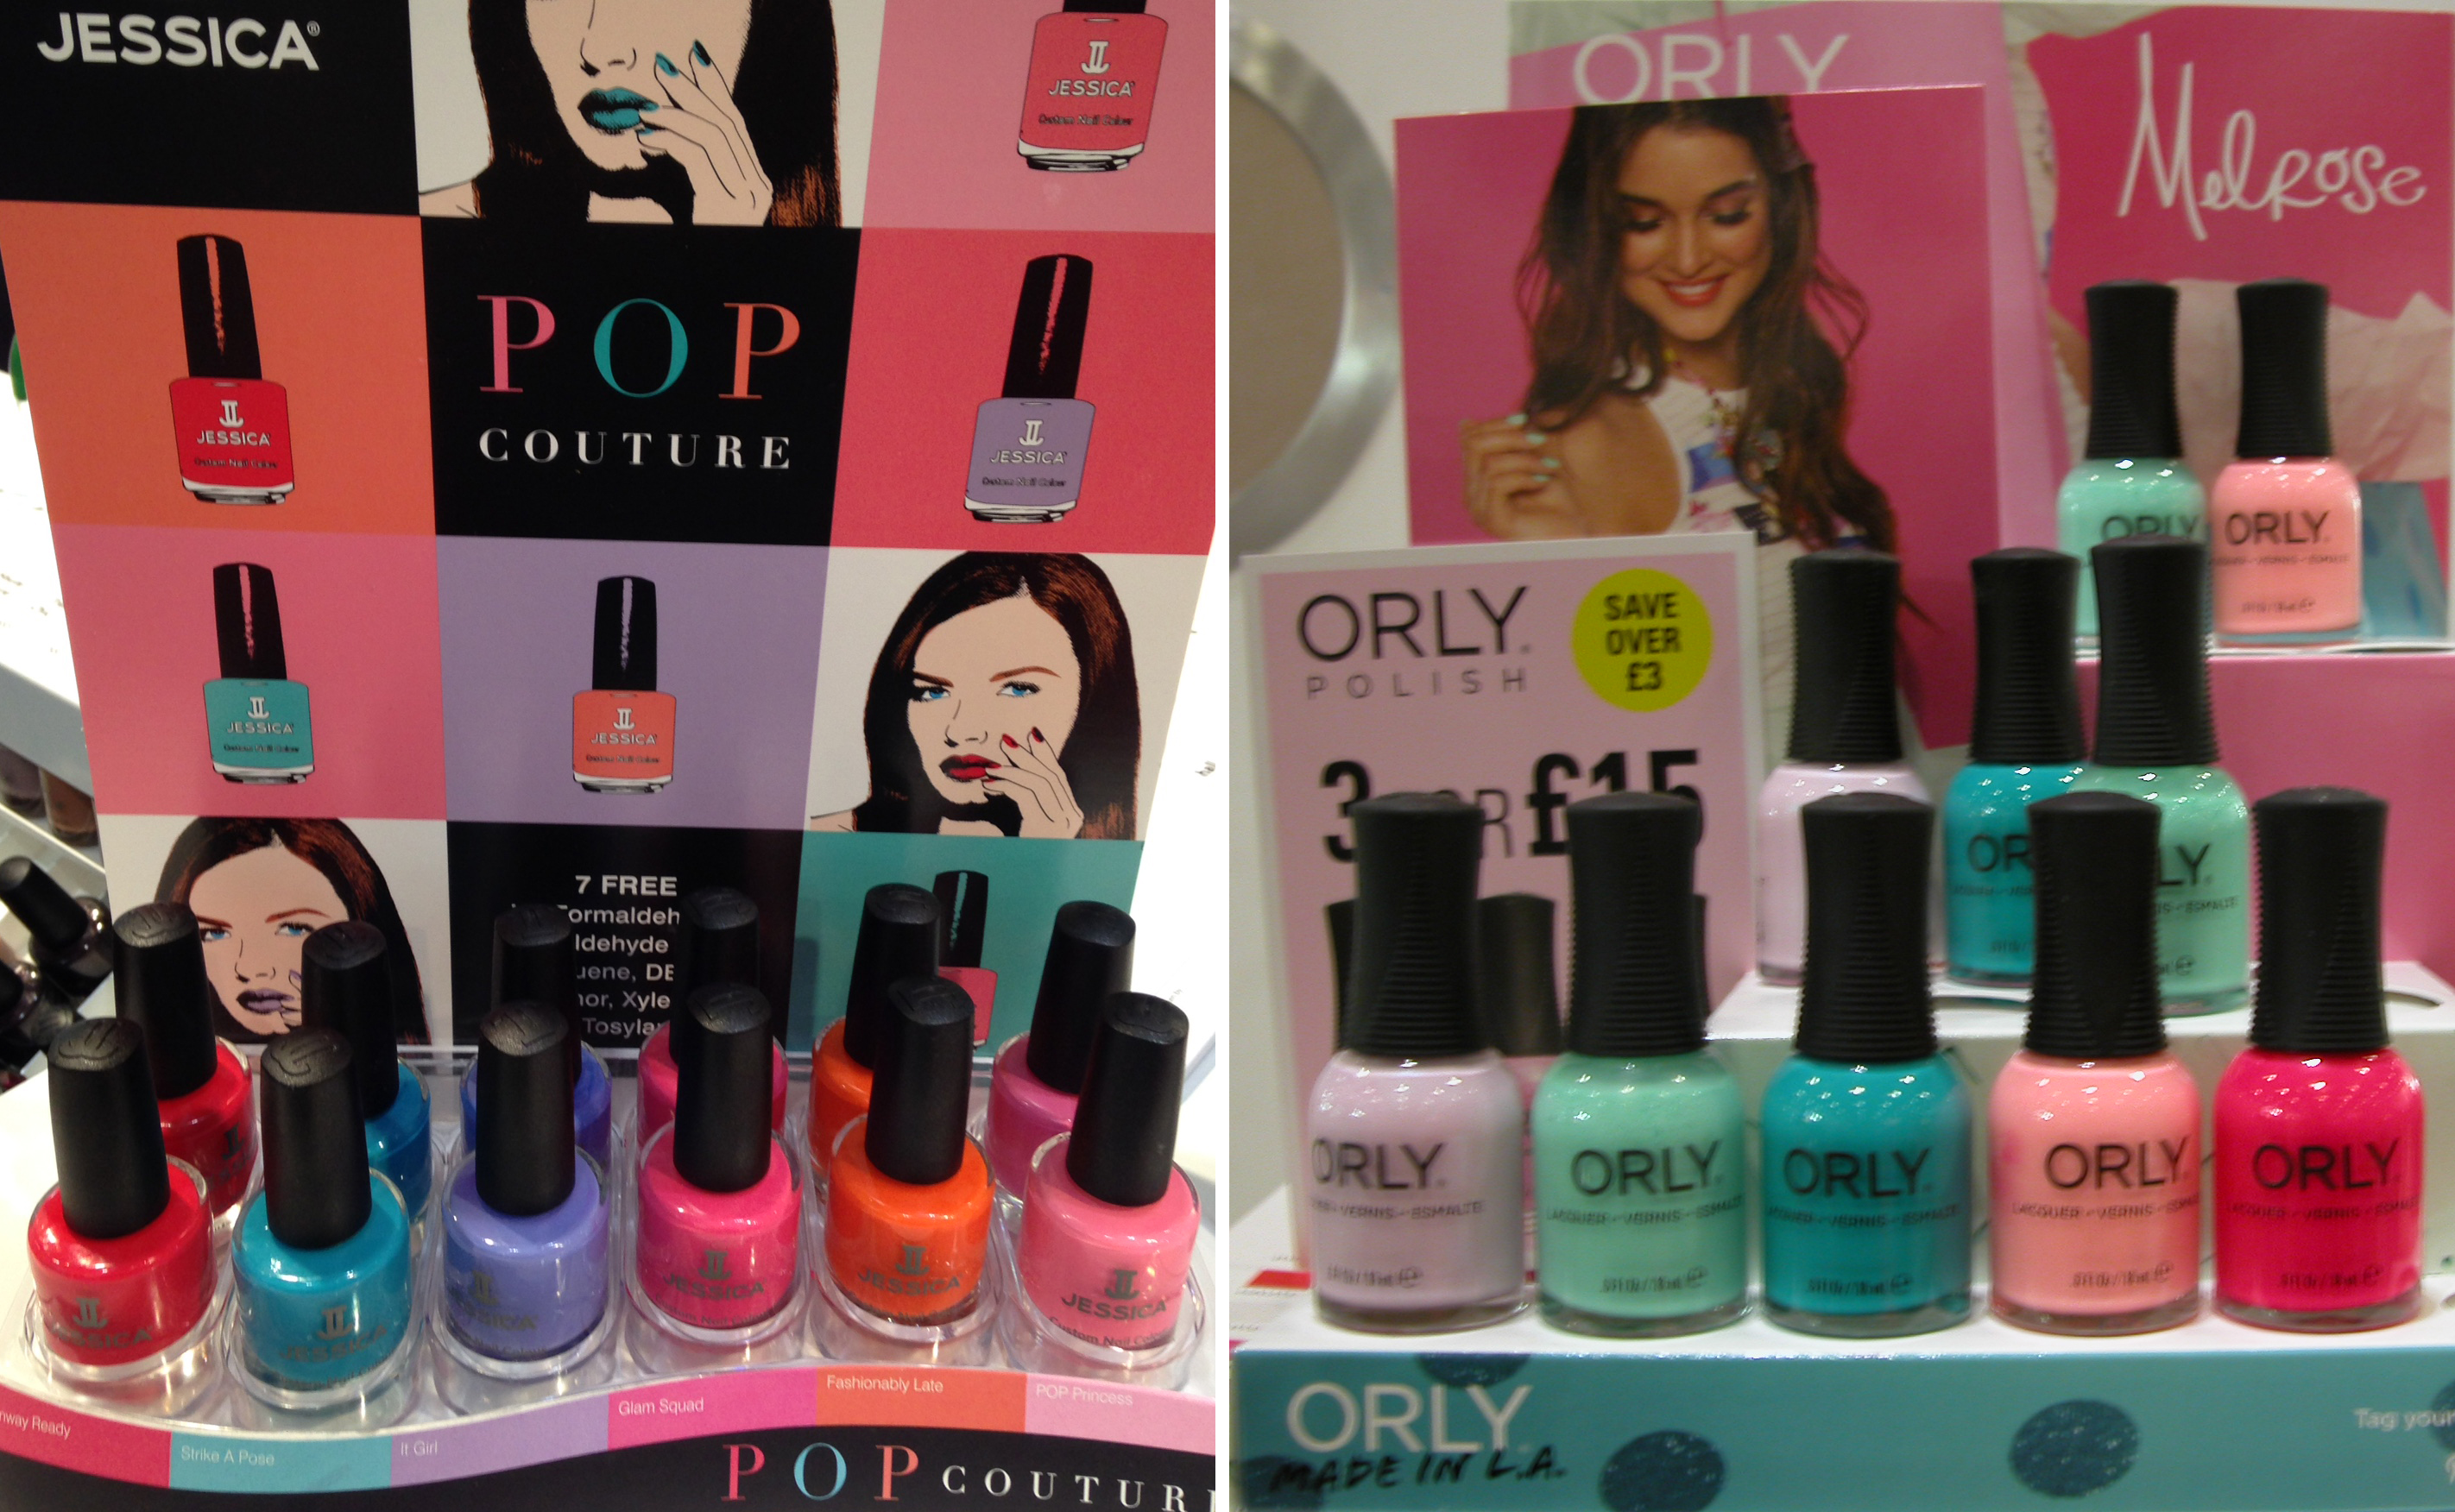 Pop Couture by Jessica and Melrose by Orly